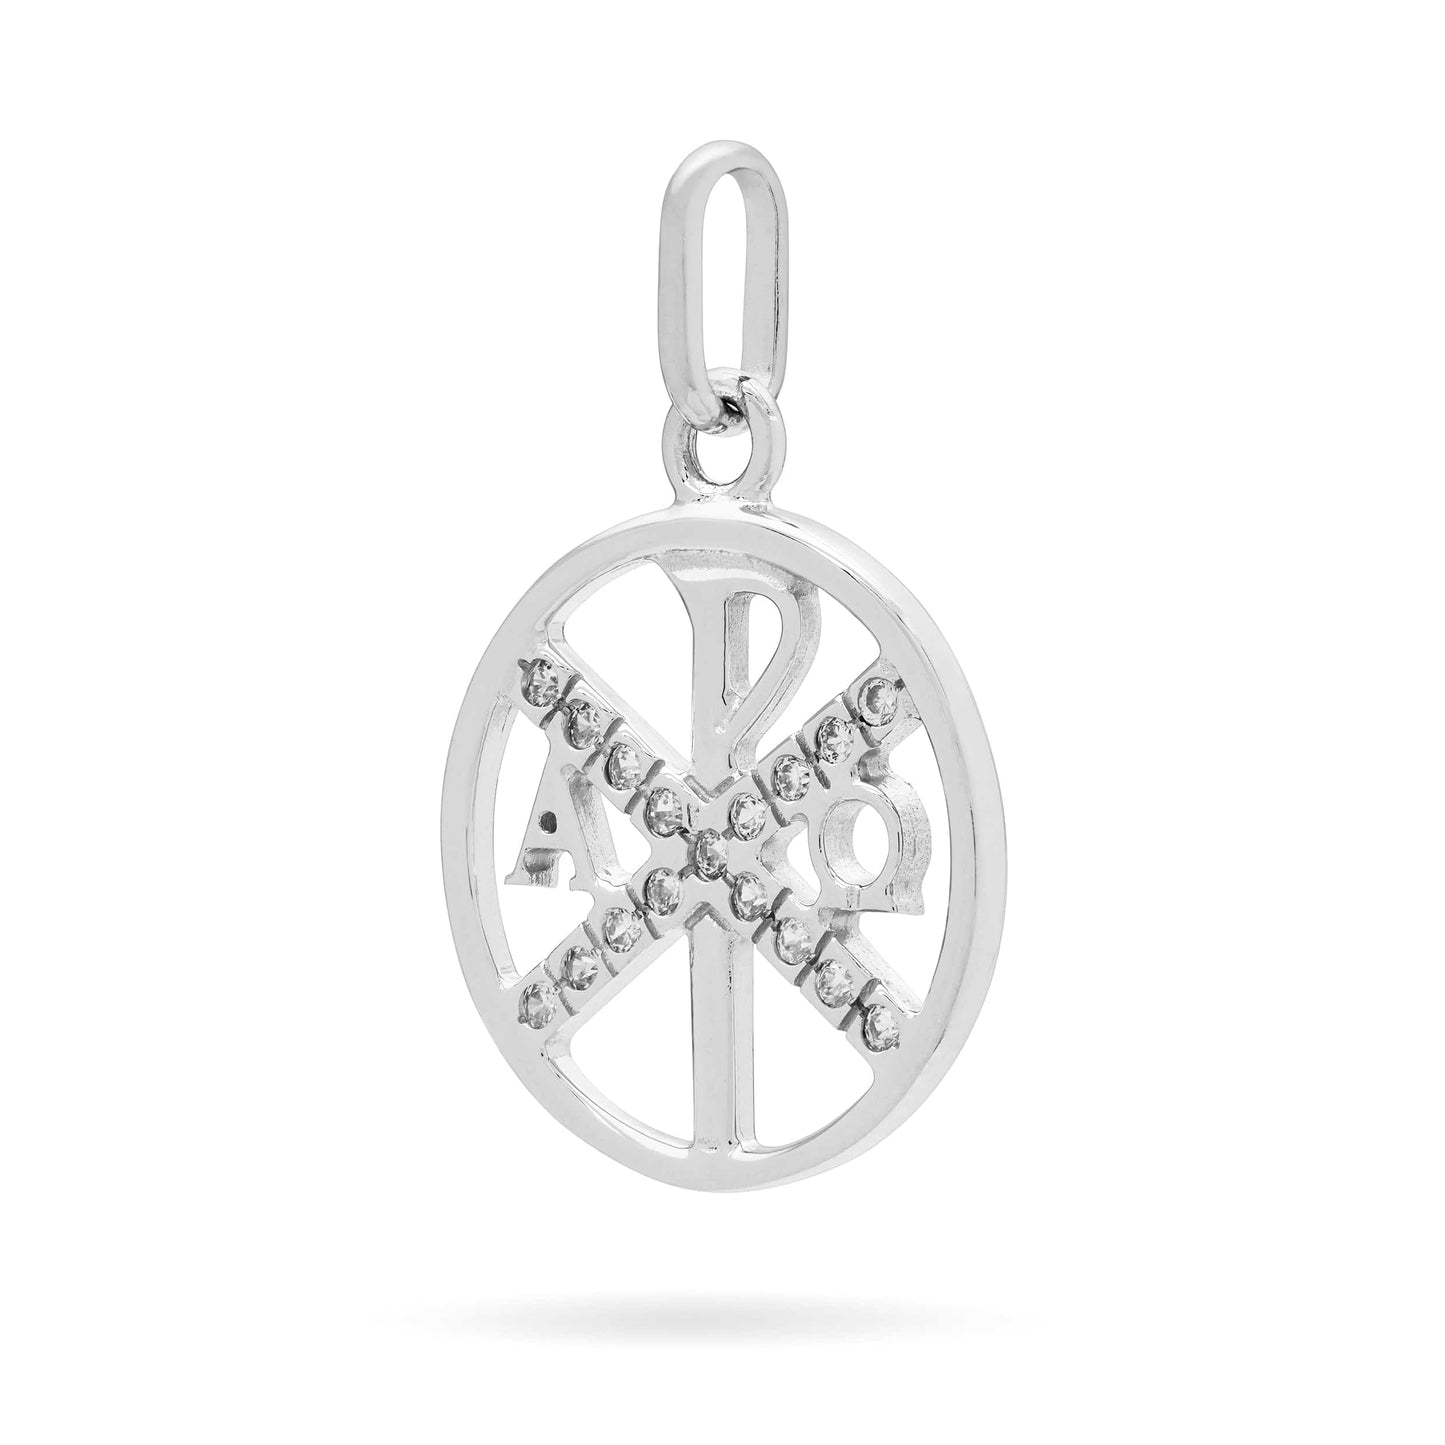 MONDO CATTOLICO Medal 16 mm (0.63 in) Sterling Silver Peace Cross Medal with Zirconia